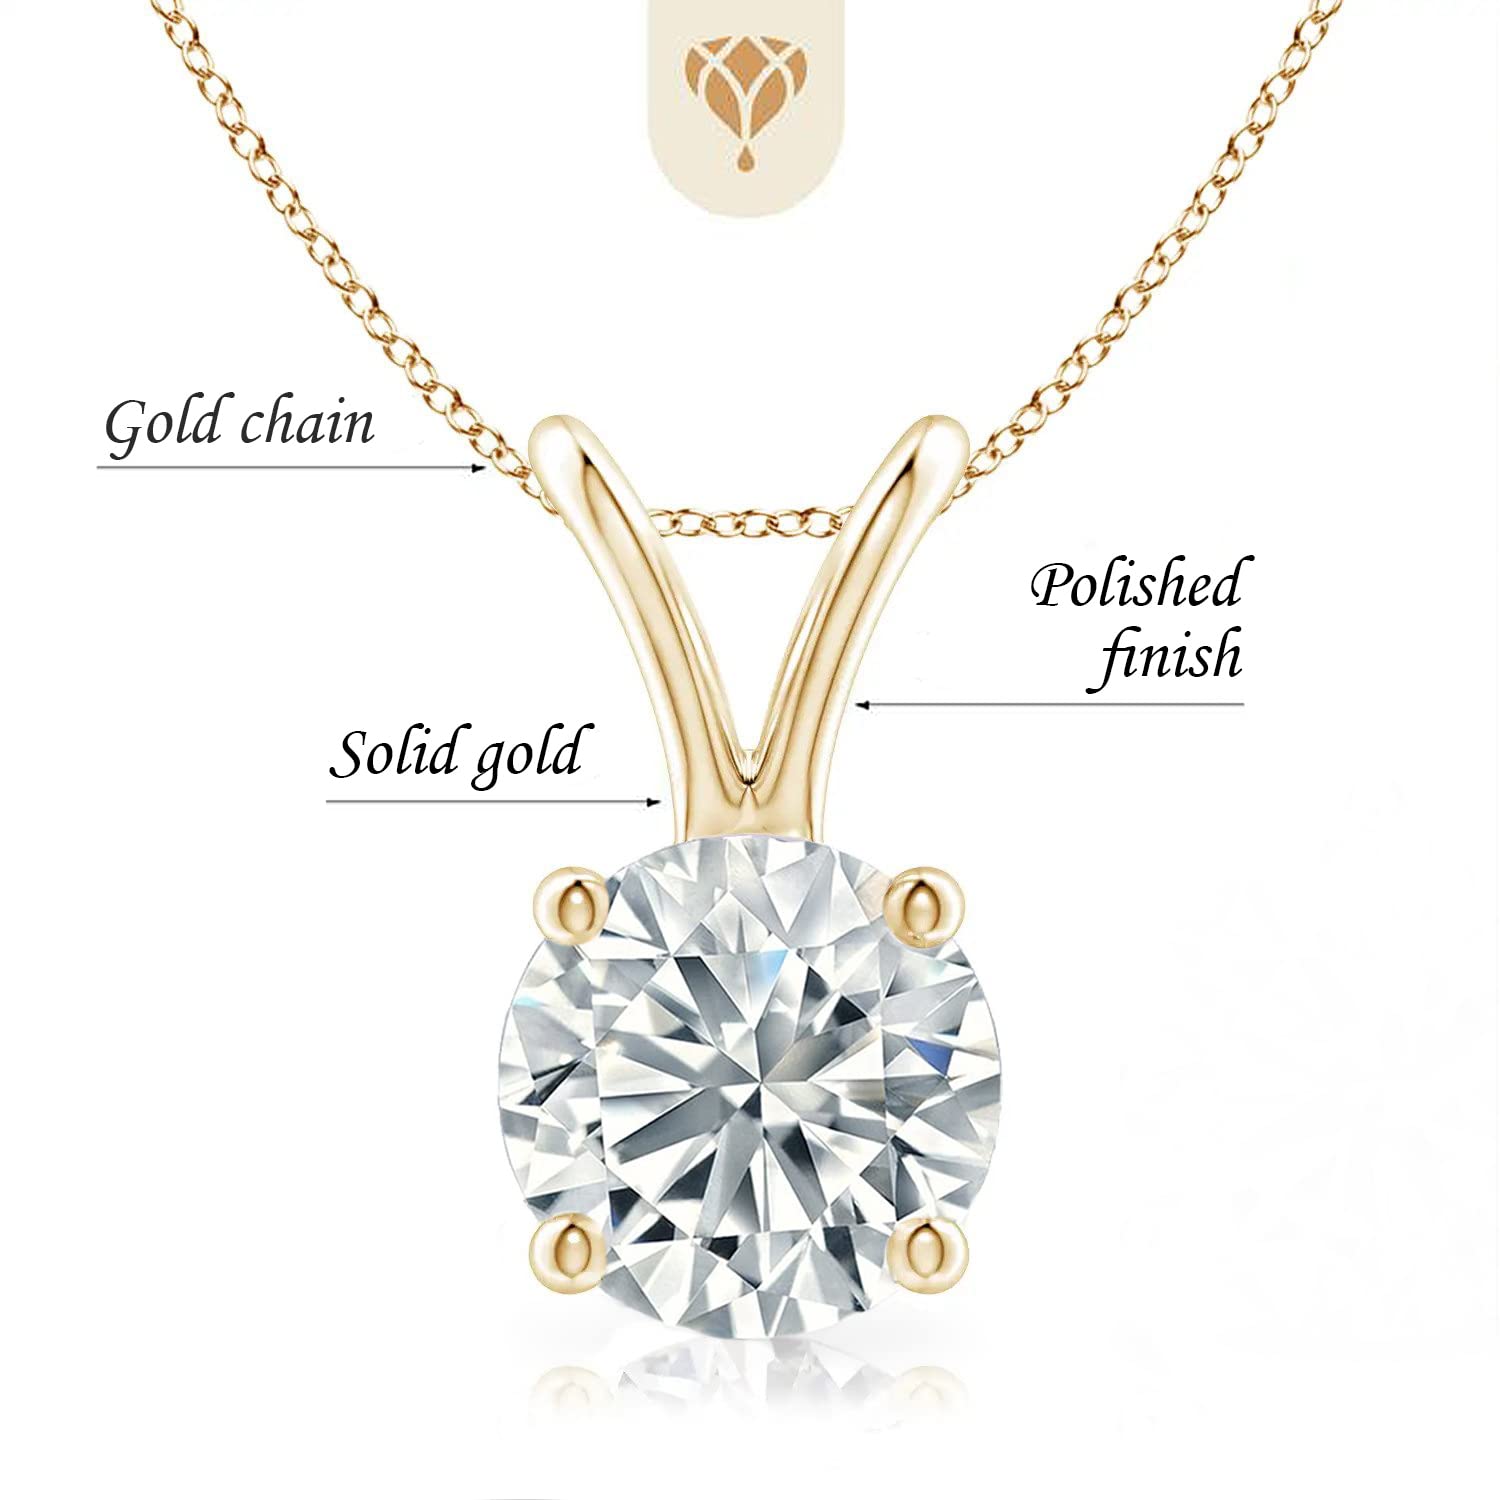 The Diamond Deal .25-1.00 Carat Round Brilliant Solitaire Lab-Grown Diamond Solitaire Pendant Necklace For Women Girls infants | 14k Yellow or White or Rose/Pink Gold With 18